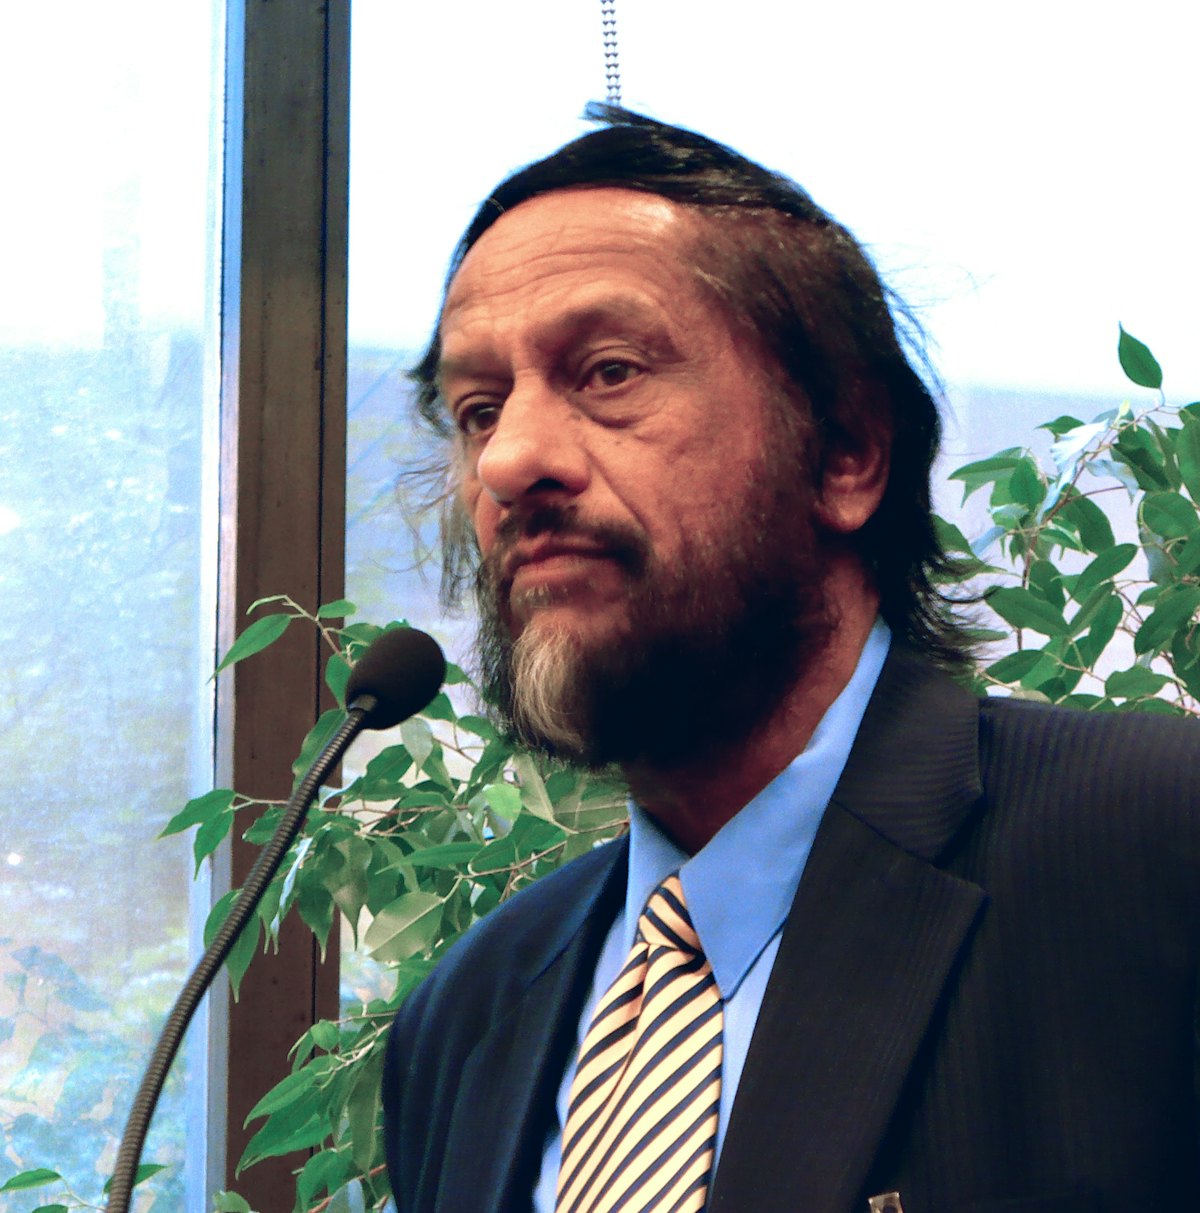 Rajendra K. Pachauri, head of the Intergovernmental Panel on Climate Change, said the effects of climate change will be "inequitable, unequal, and severe in many parts of the world." He spoke at Baha'i offices in New York on 23 September.